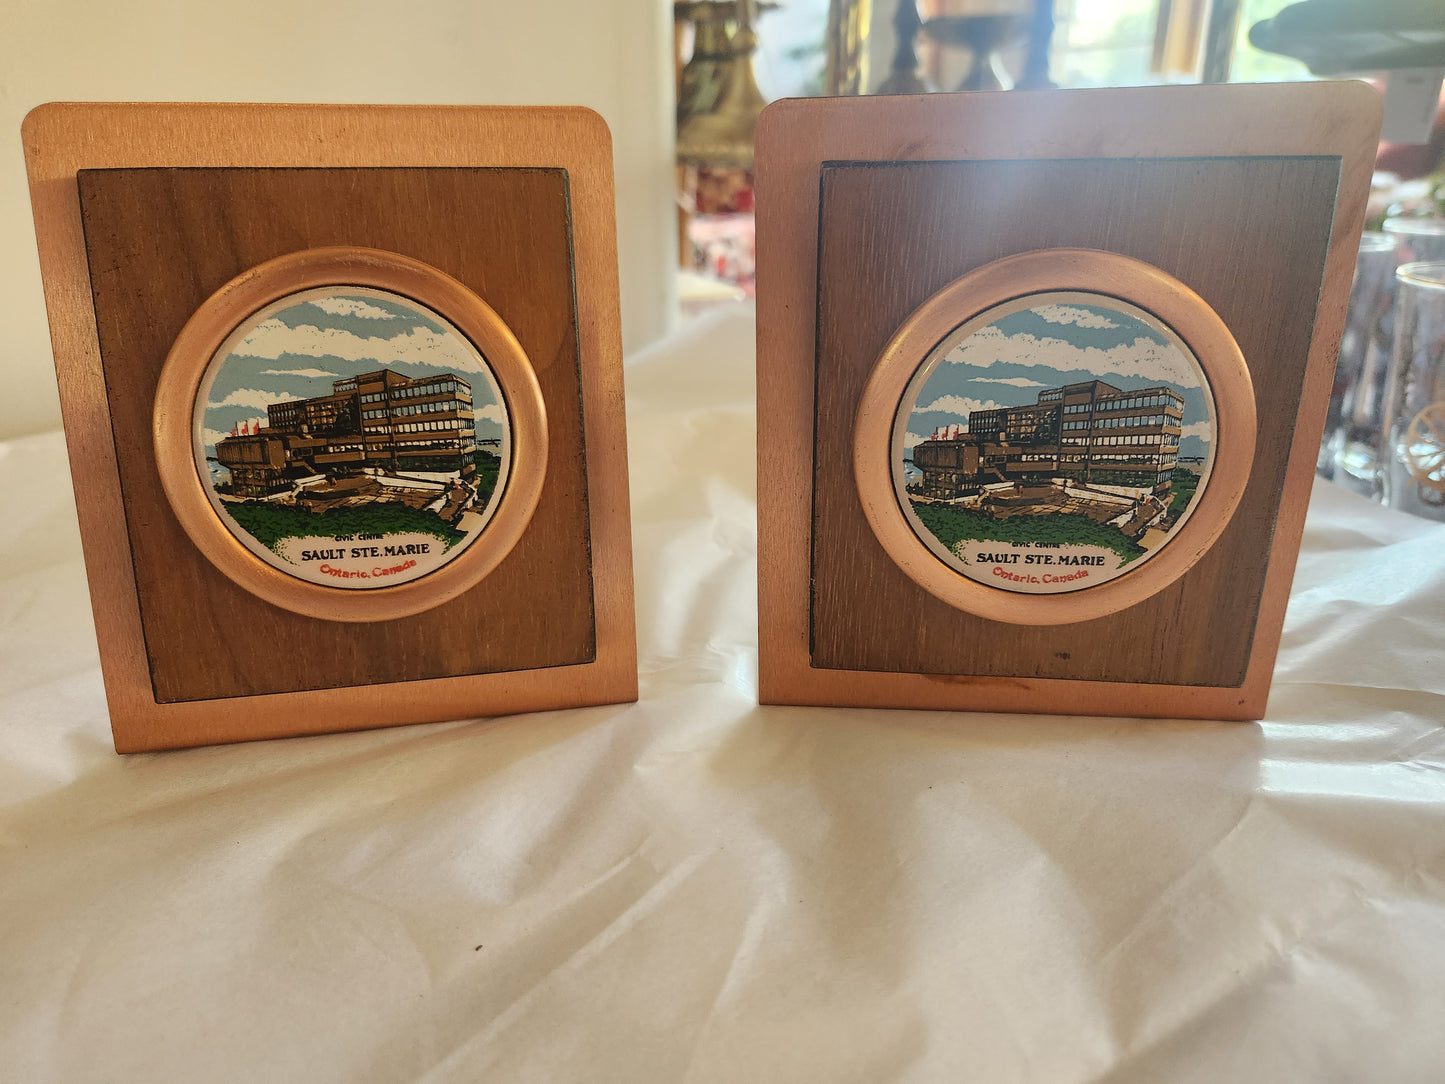 Sault Ste. Marie Copper Bookends